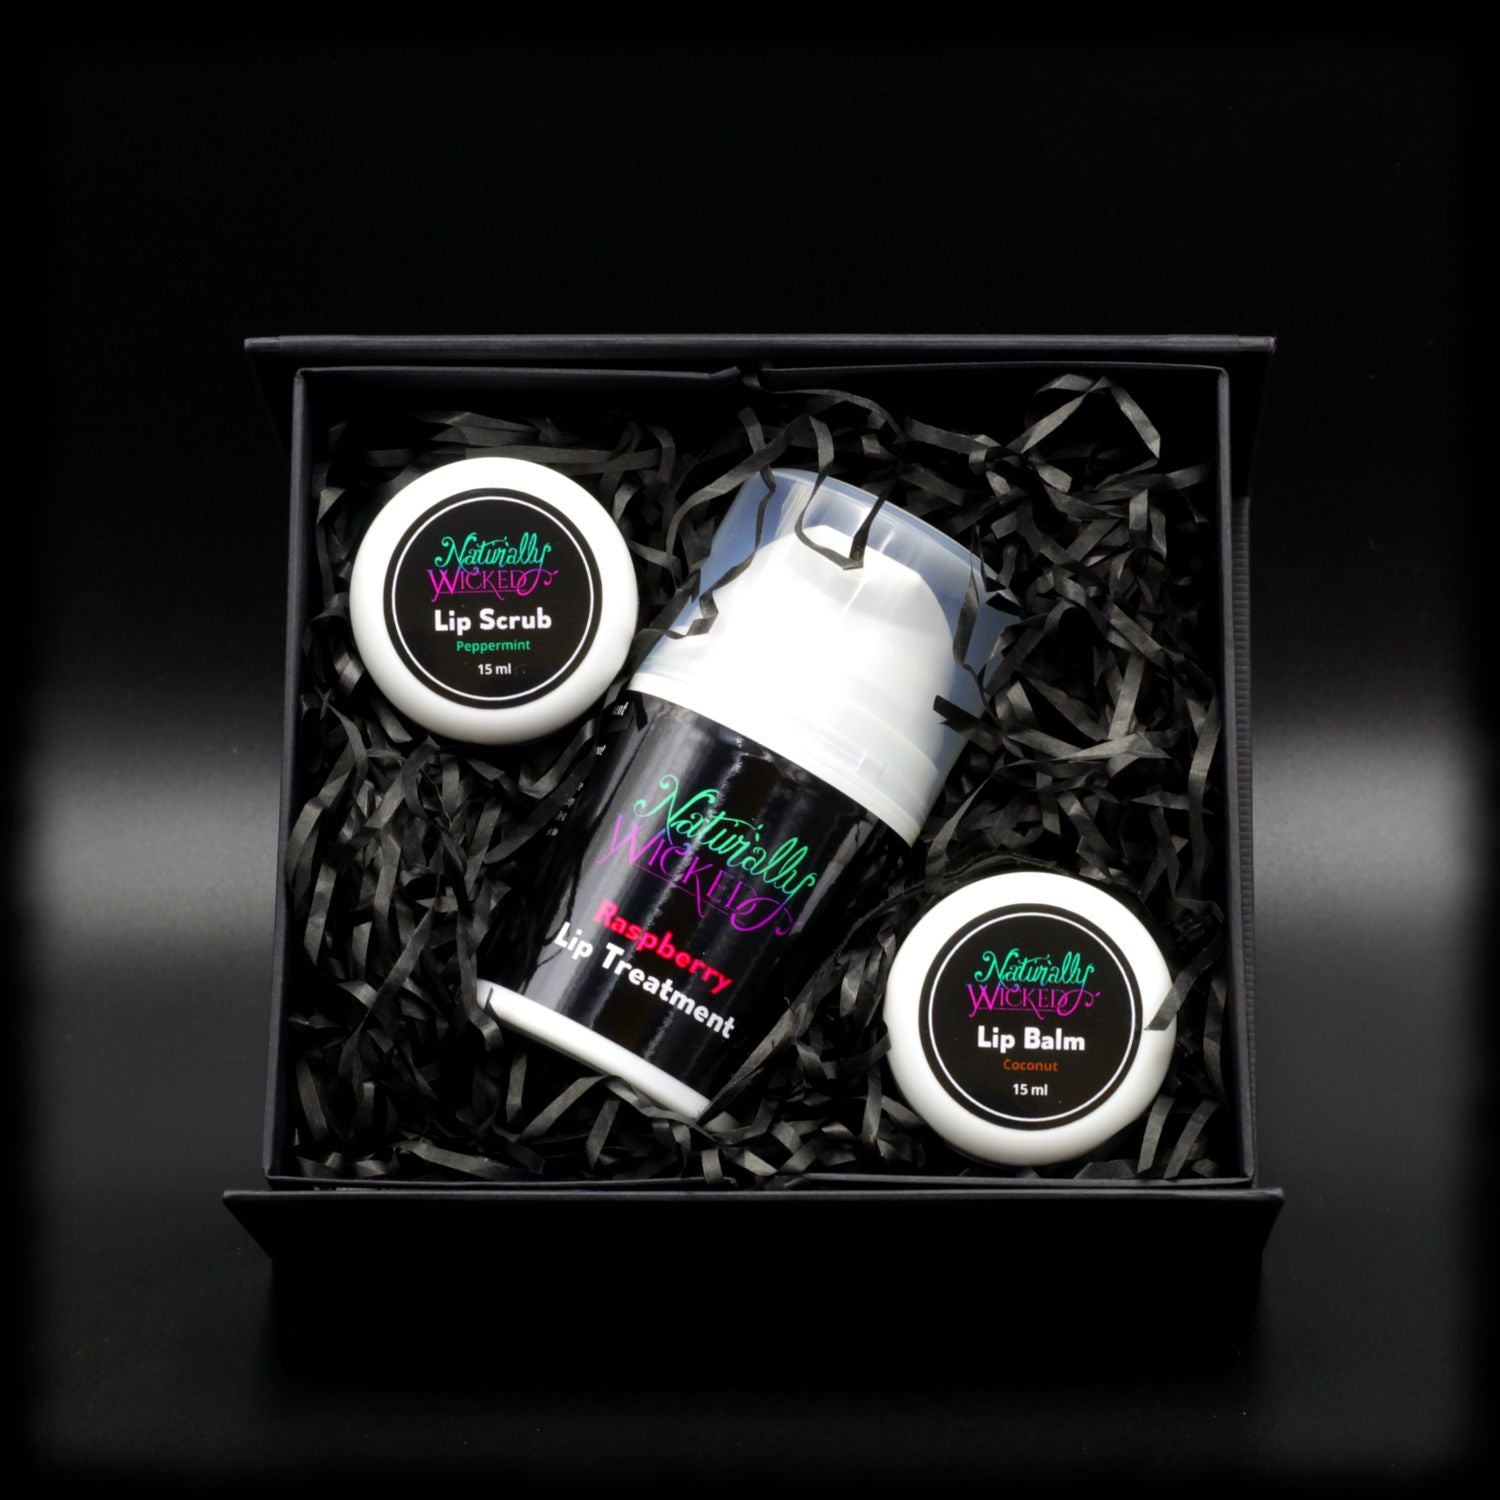 Naturally Wicked Peppermint Lip Scrub, Raspberry Lip Treatment & Coconut Lip Balm Within Black Gift Packaging In Naturally Wicked Original Box